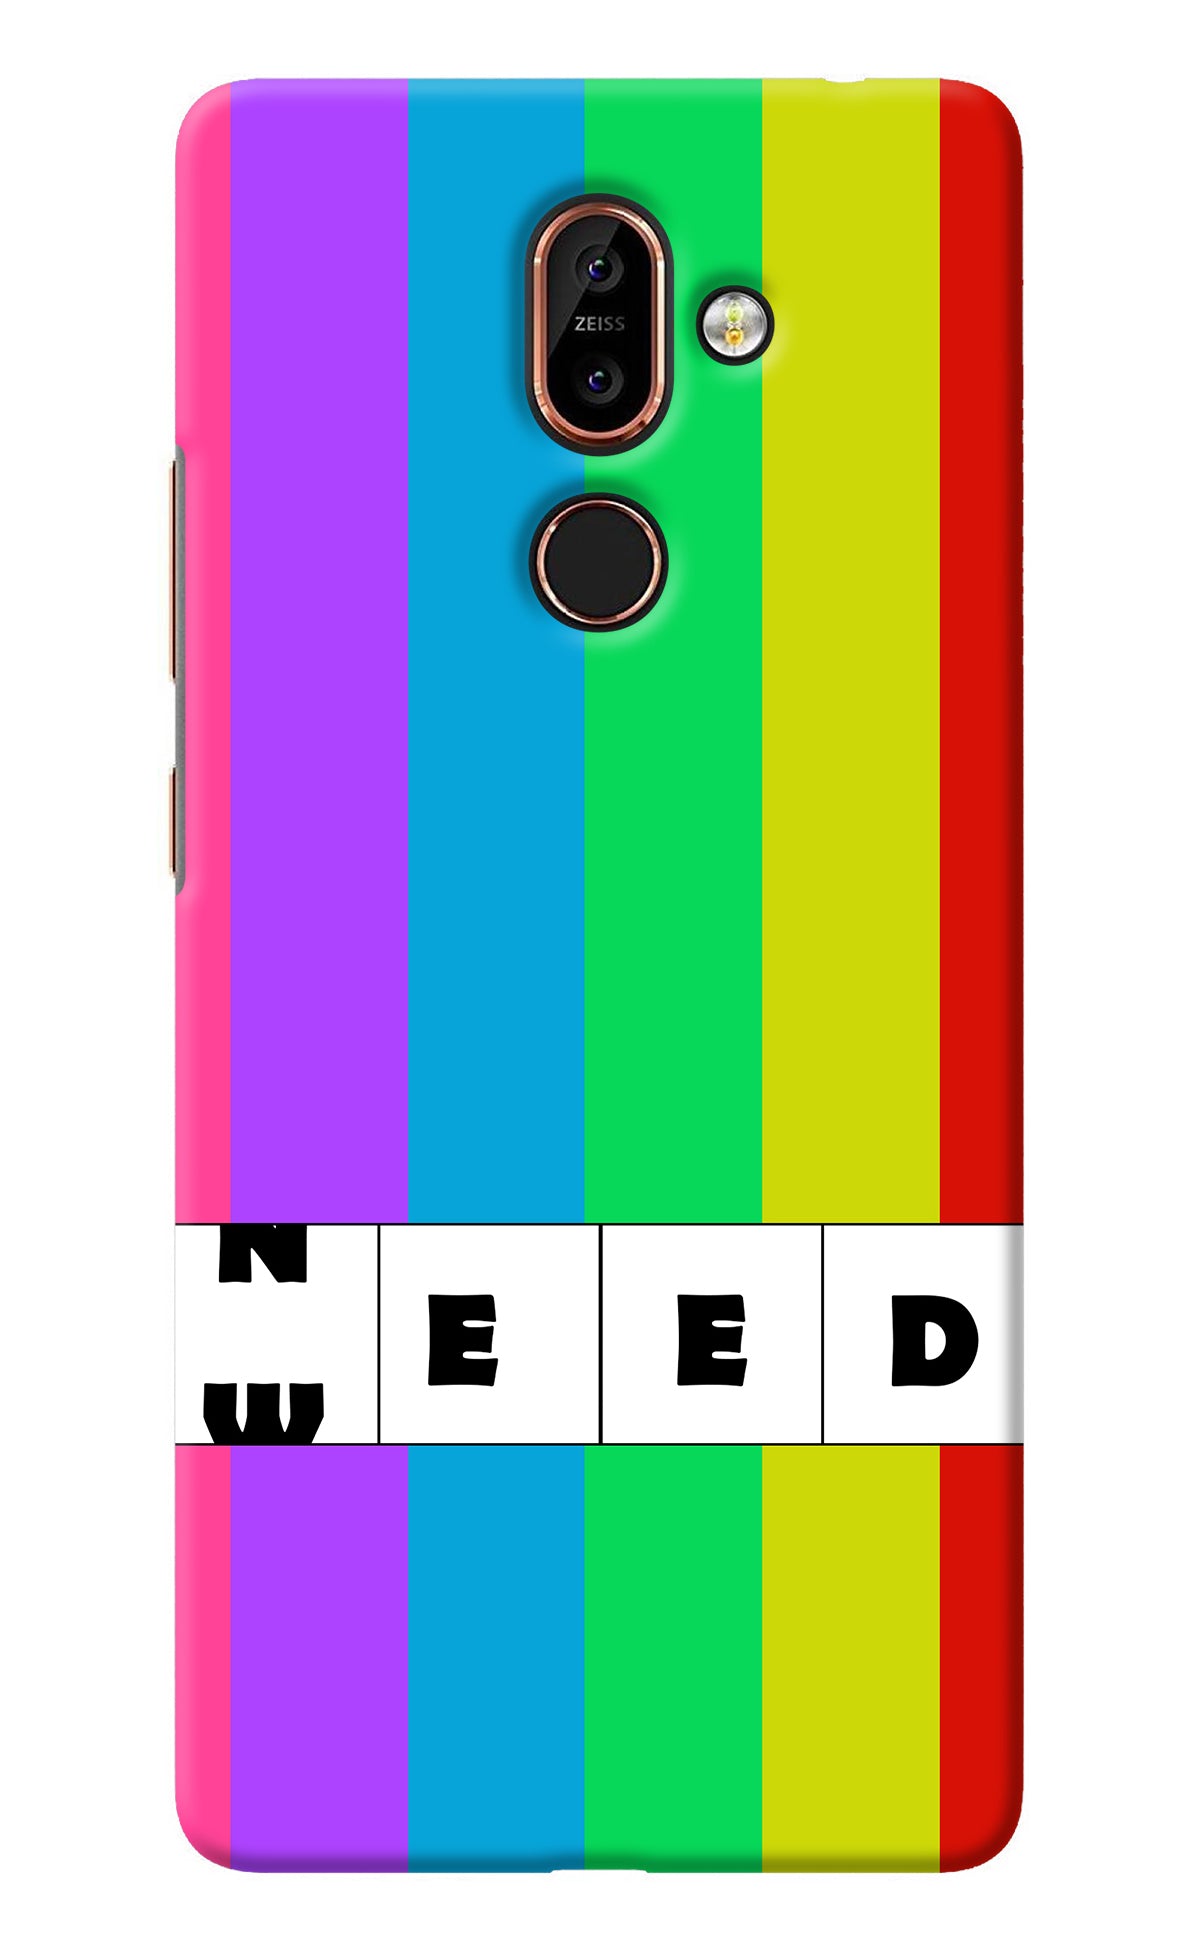 Need Weed Nokia 7 Plus Back Cover